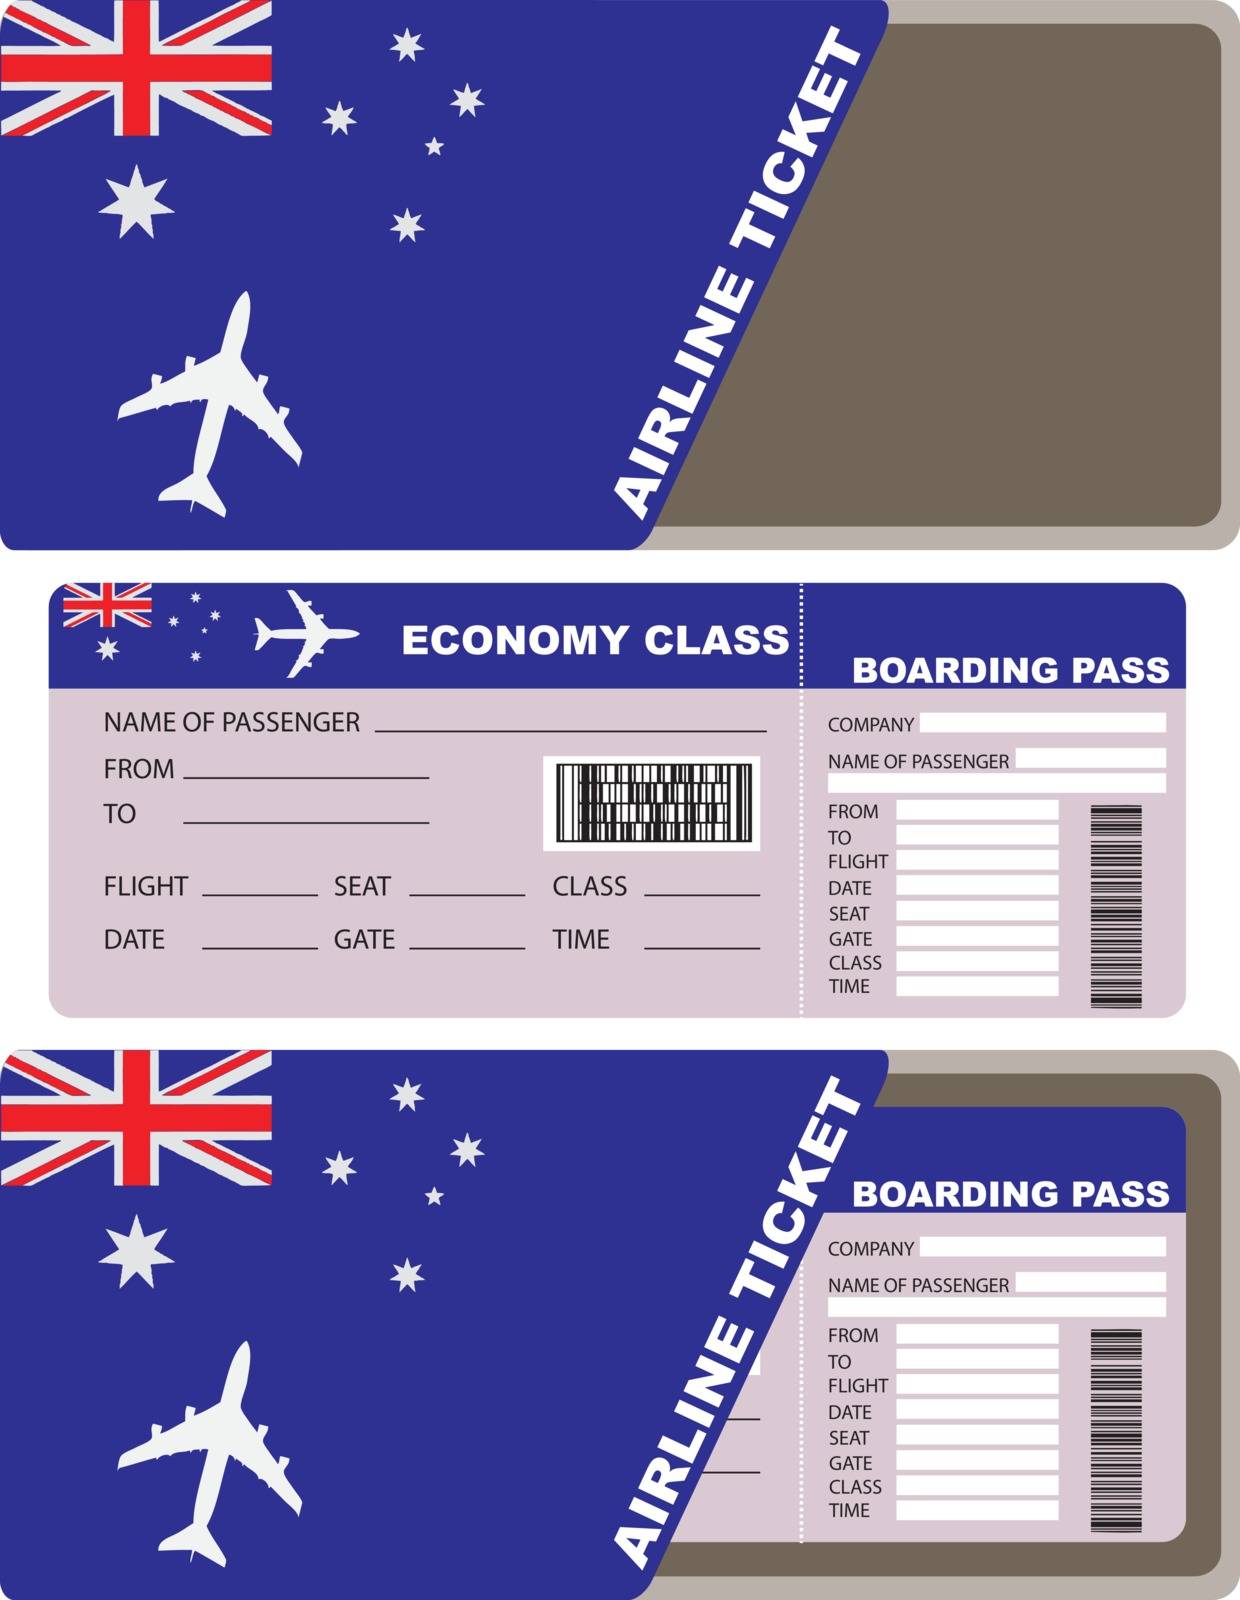 Plane ticket first class in Australia by VIPDesignUSA